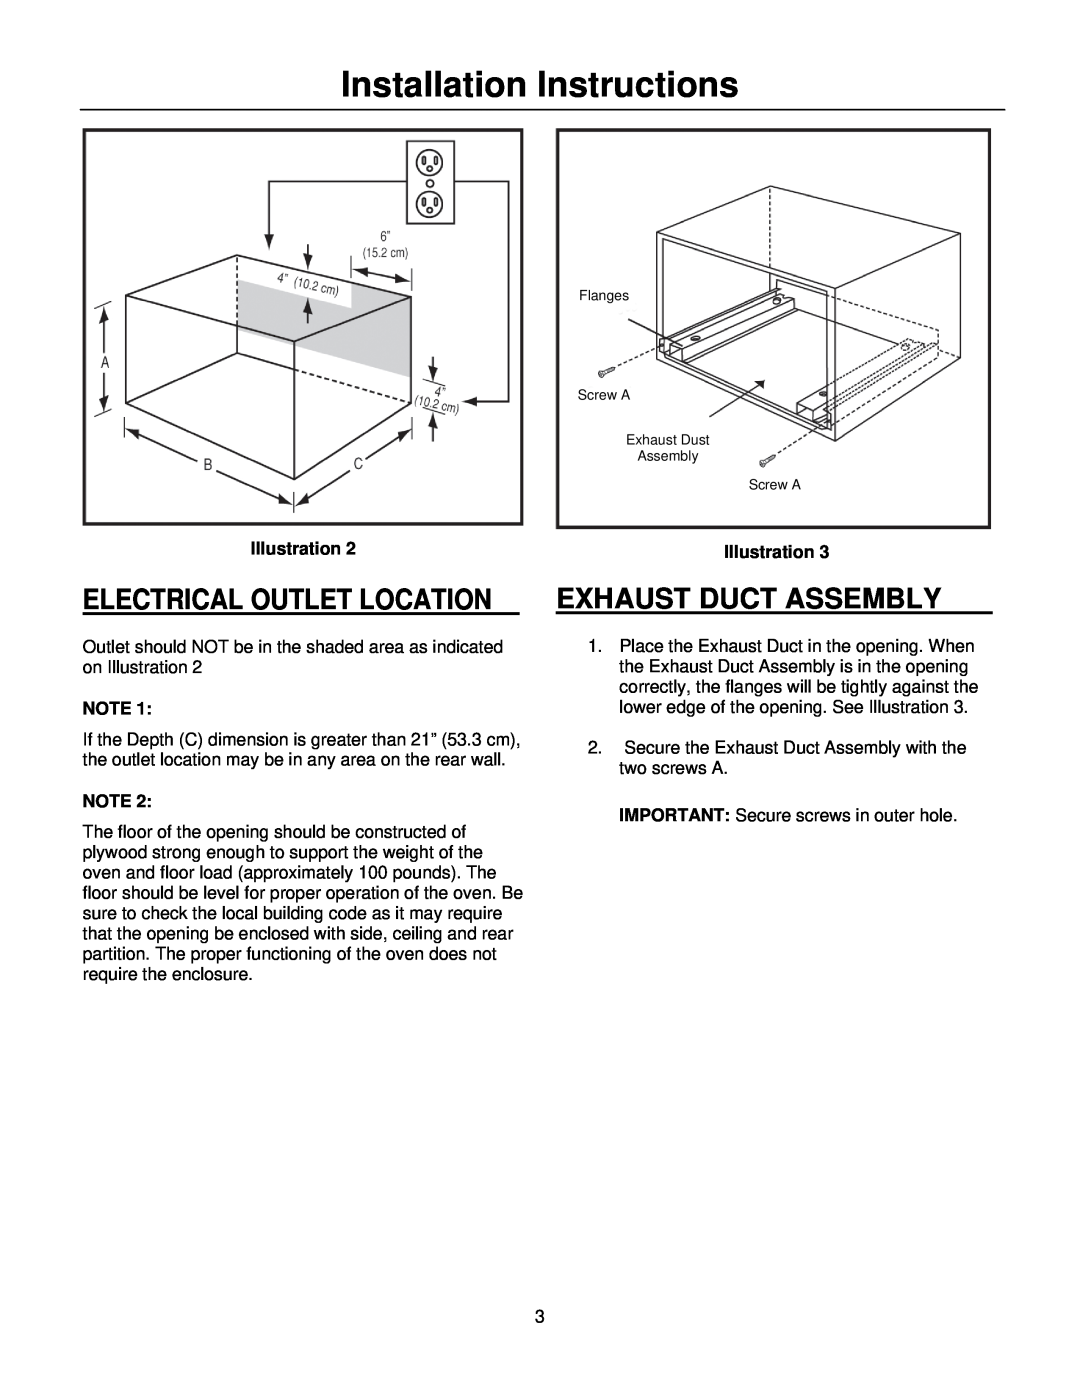 Frigidaire MWTK(P)30K Electrical Outlet Location, Exhaust Duct Assembly, Installation Instructions, Illustration 